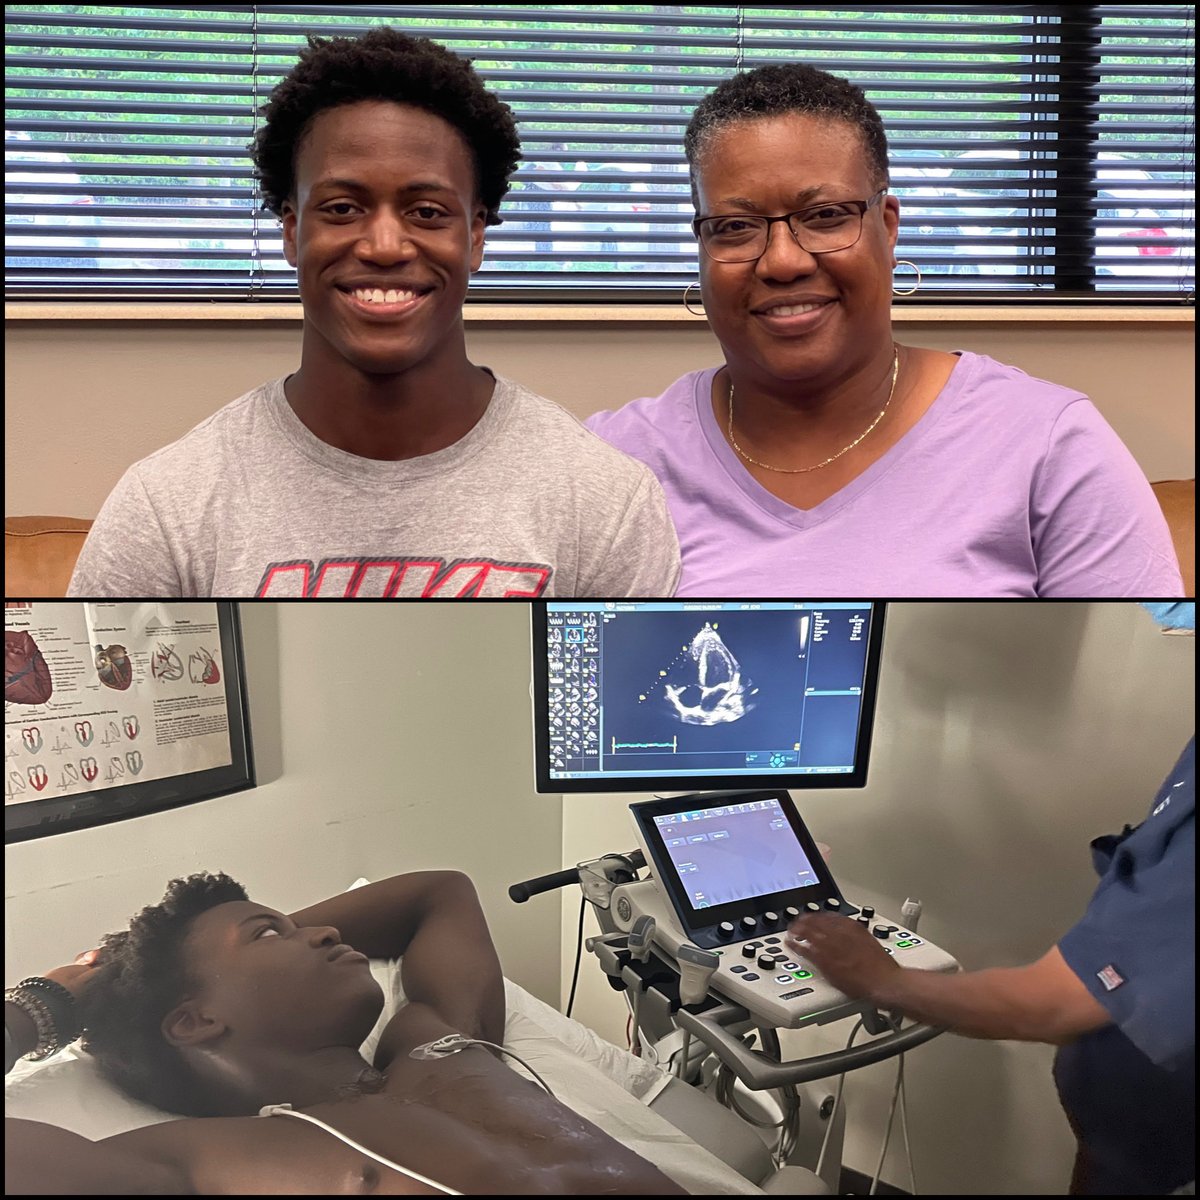 Thank you Sonya for bringing your son Trenton in for an Echocardiogram to check his heart health! It was a perfect report! #HearttoHeart #JackAlkhatibFoundation #AdvancedDiagnostics #savingstudents #IrmoSC #peaceofmind #athlete ⁦@dfhsfootball⁩ ⁦@AlkhatibJack⁩